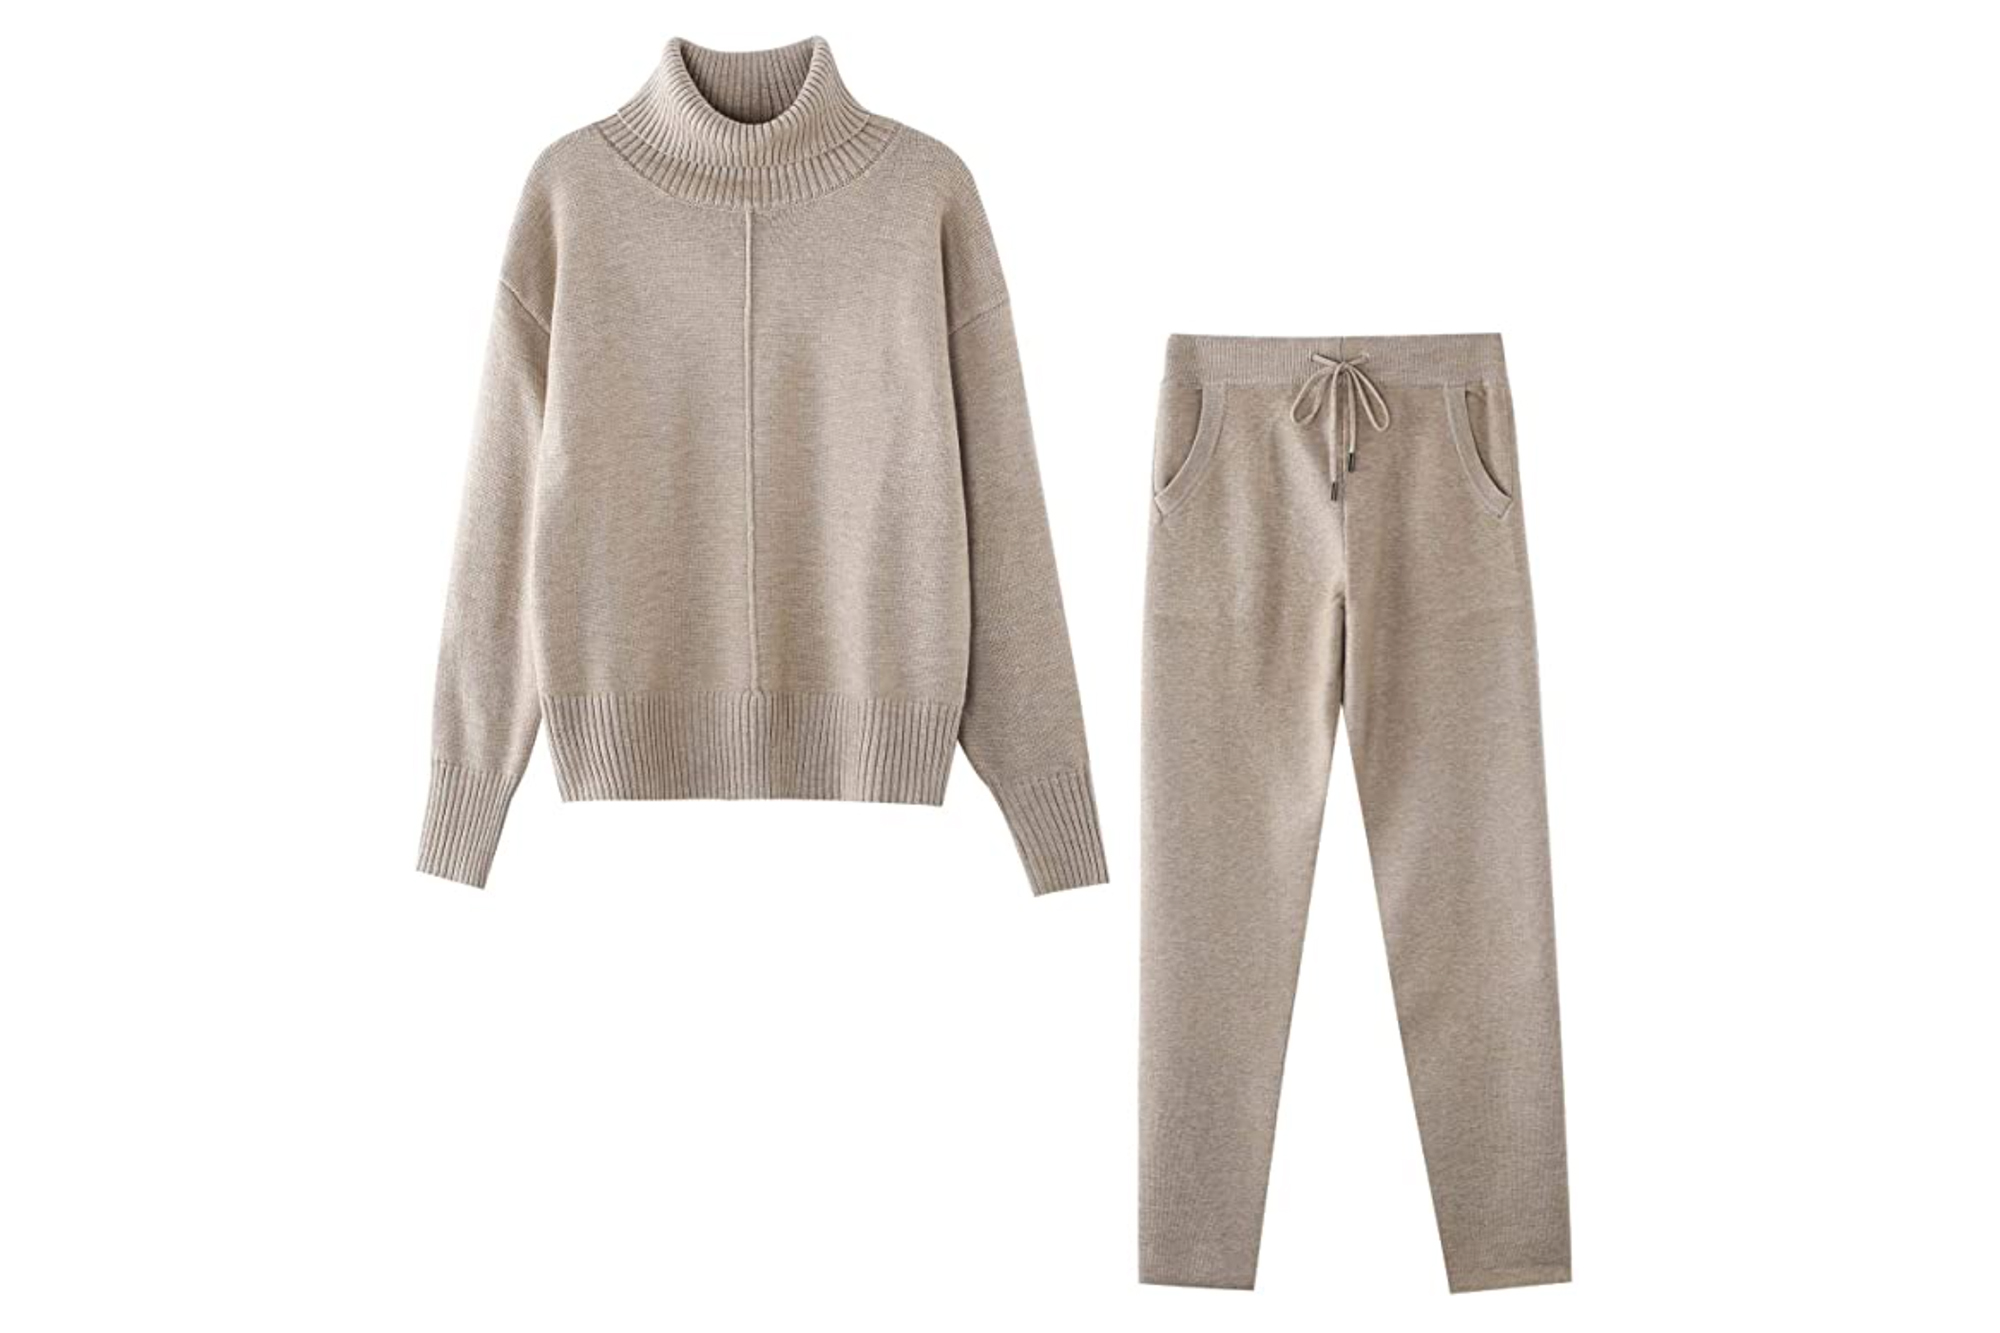 TAOVK 2-Piece Sweater Set Is Perfect for Cold Winter Nights | Us 